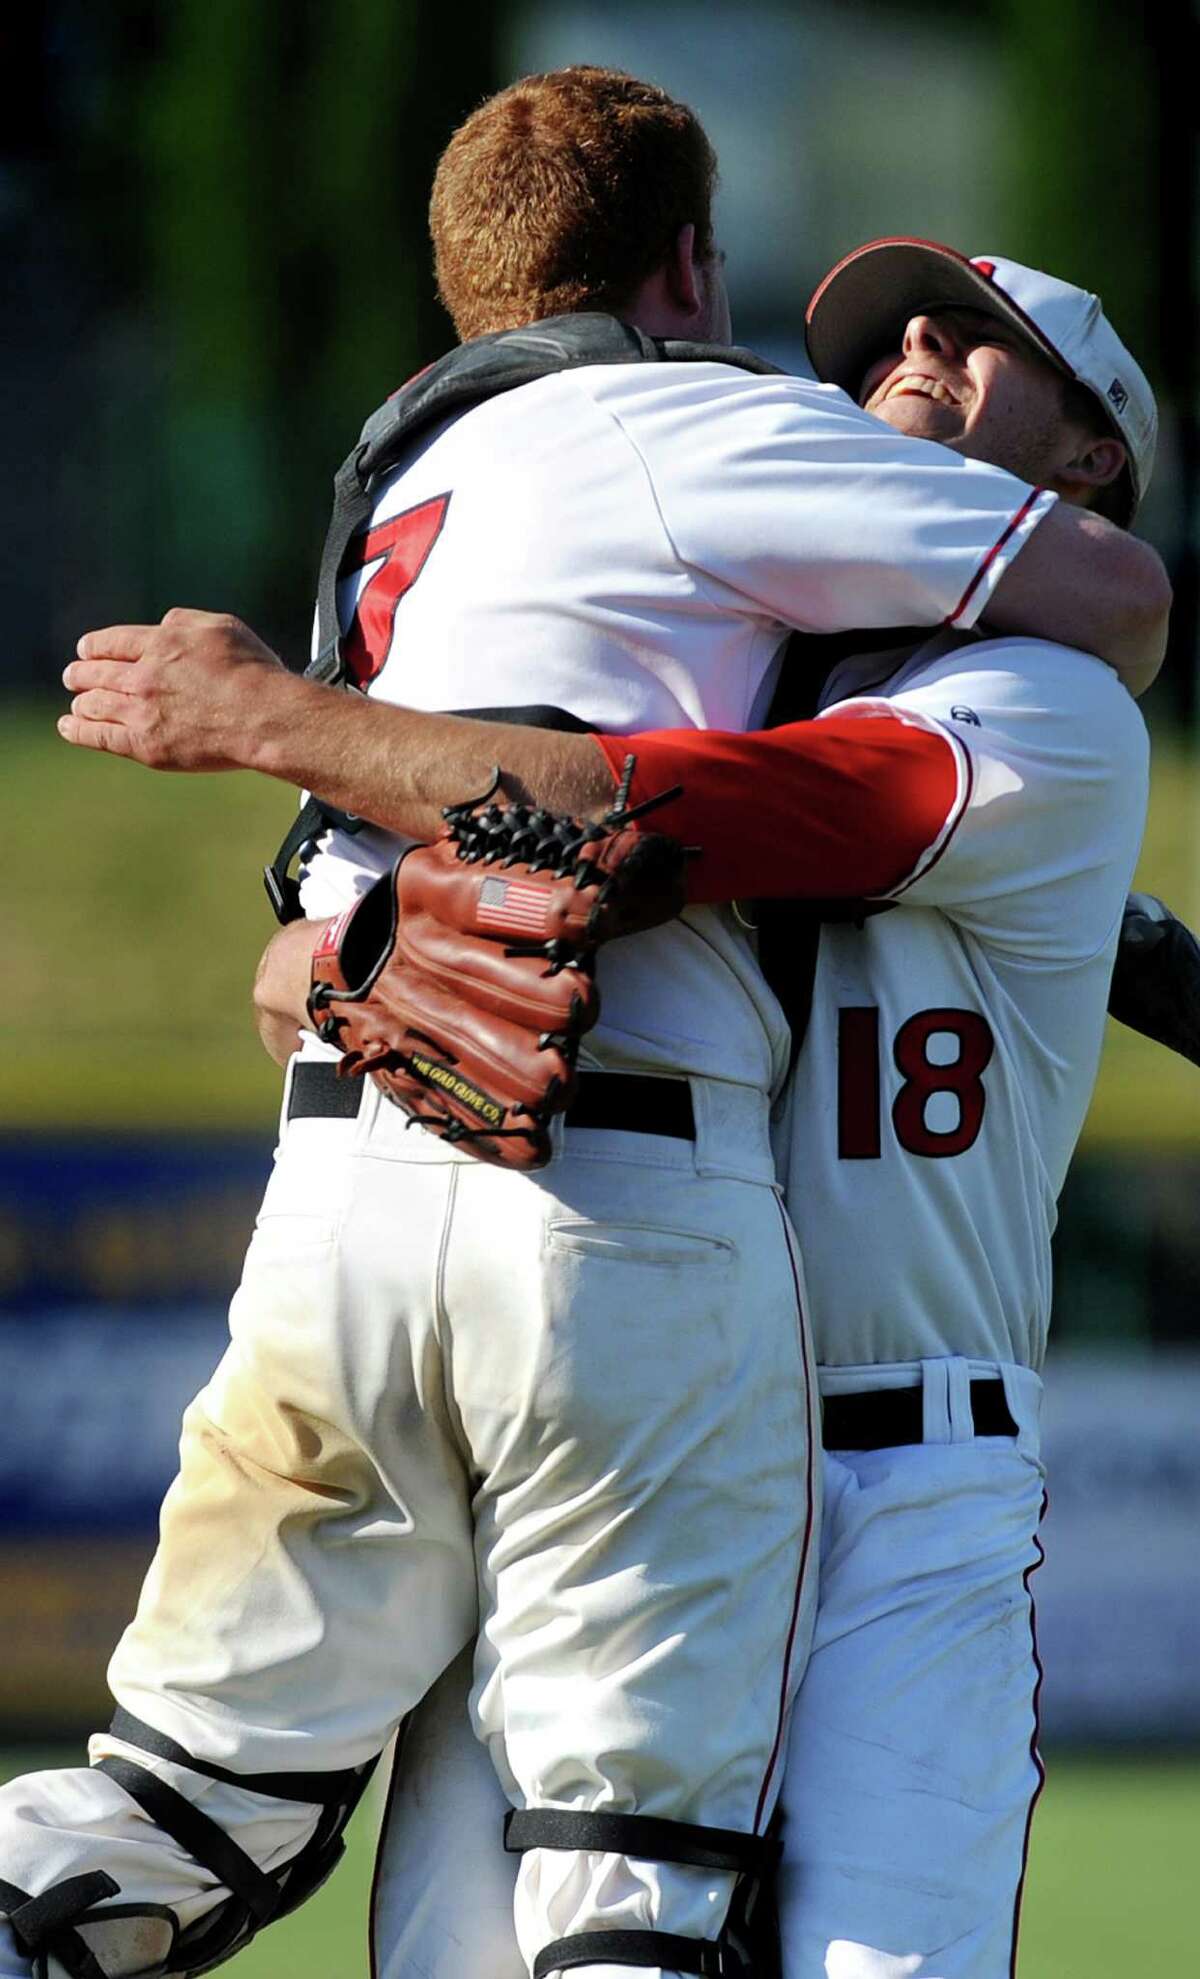 Albany Academy's pitcher Brooks Knapek, right, and catcher Sean Dempsey celebrate their 7-0 win over Schuylerville in the Class B baseball final on Thursday, May 28, 2015, at Joe Bruno Stadium in Troy, N.Y. (Cindy Schultz / Times Union)